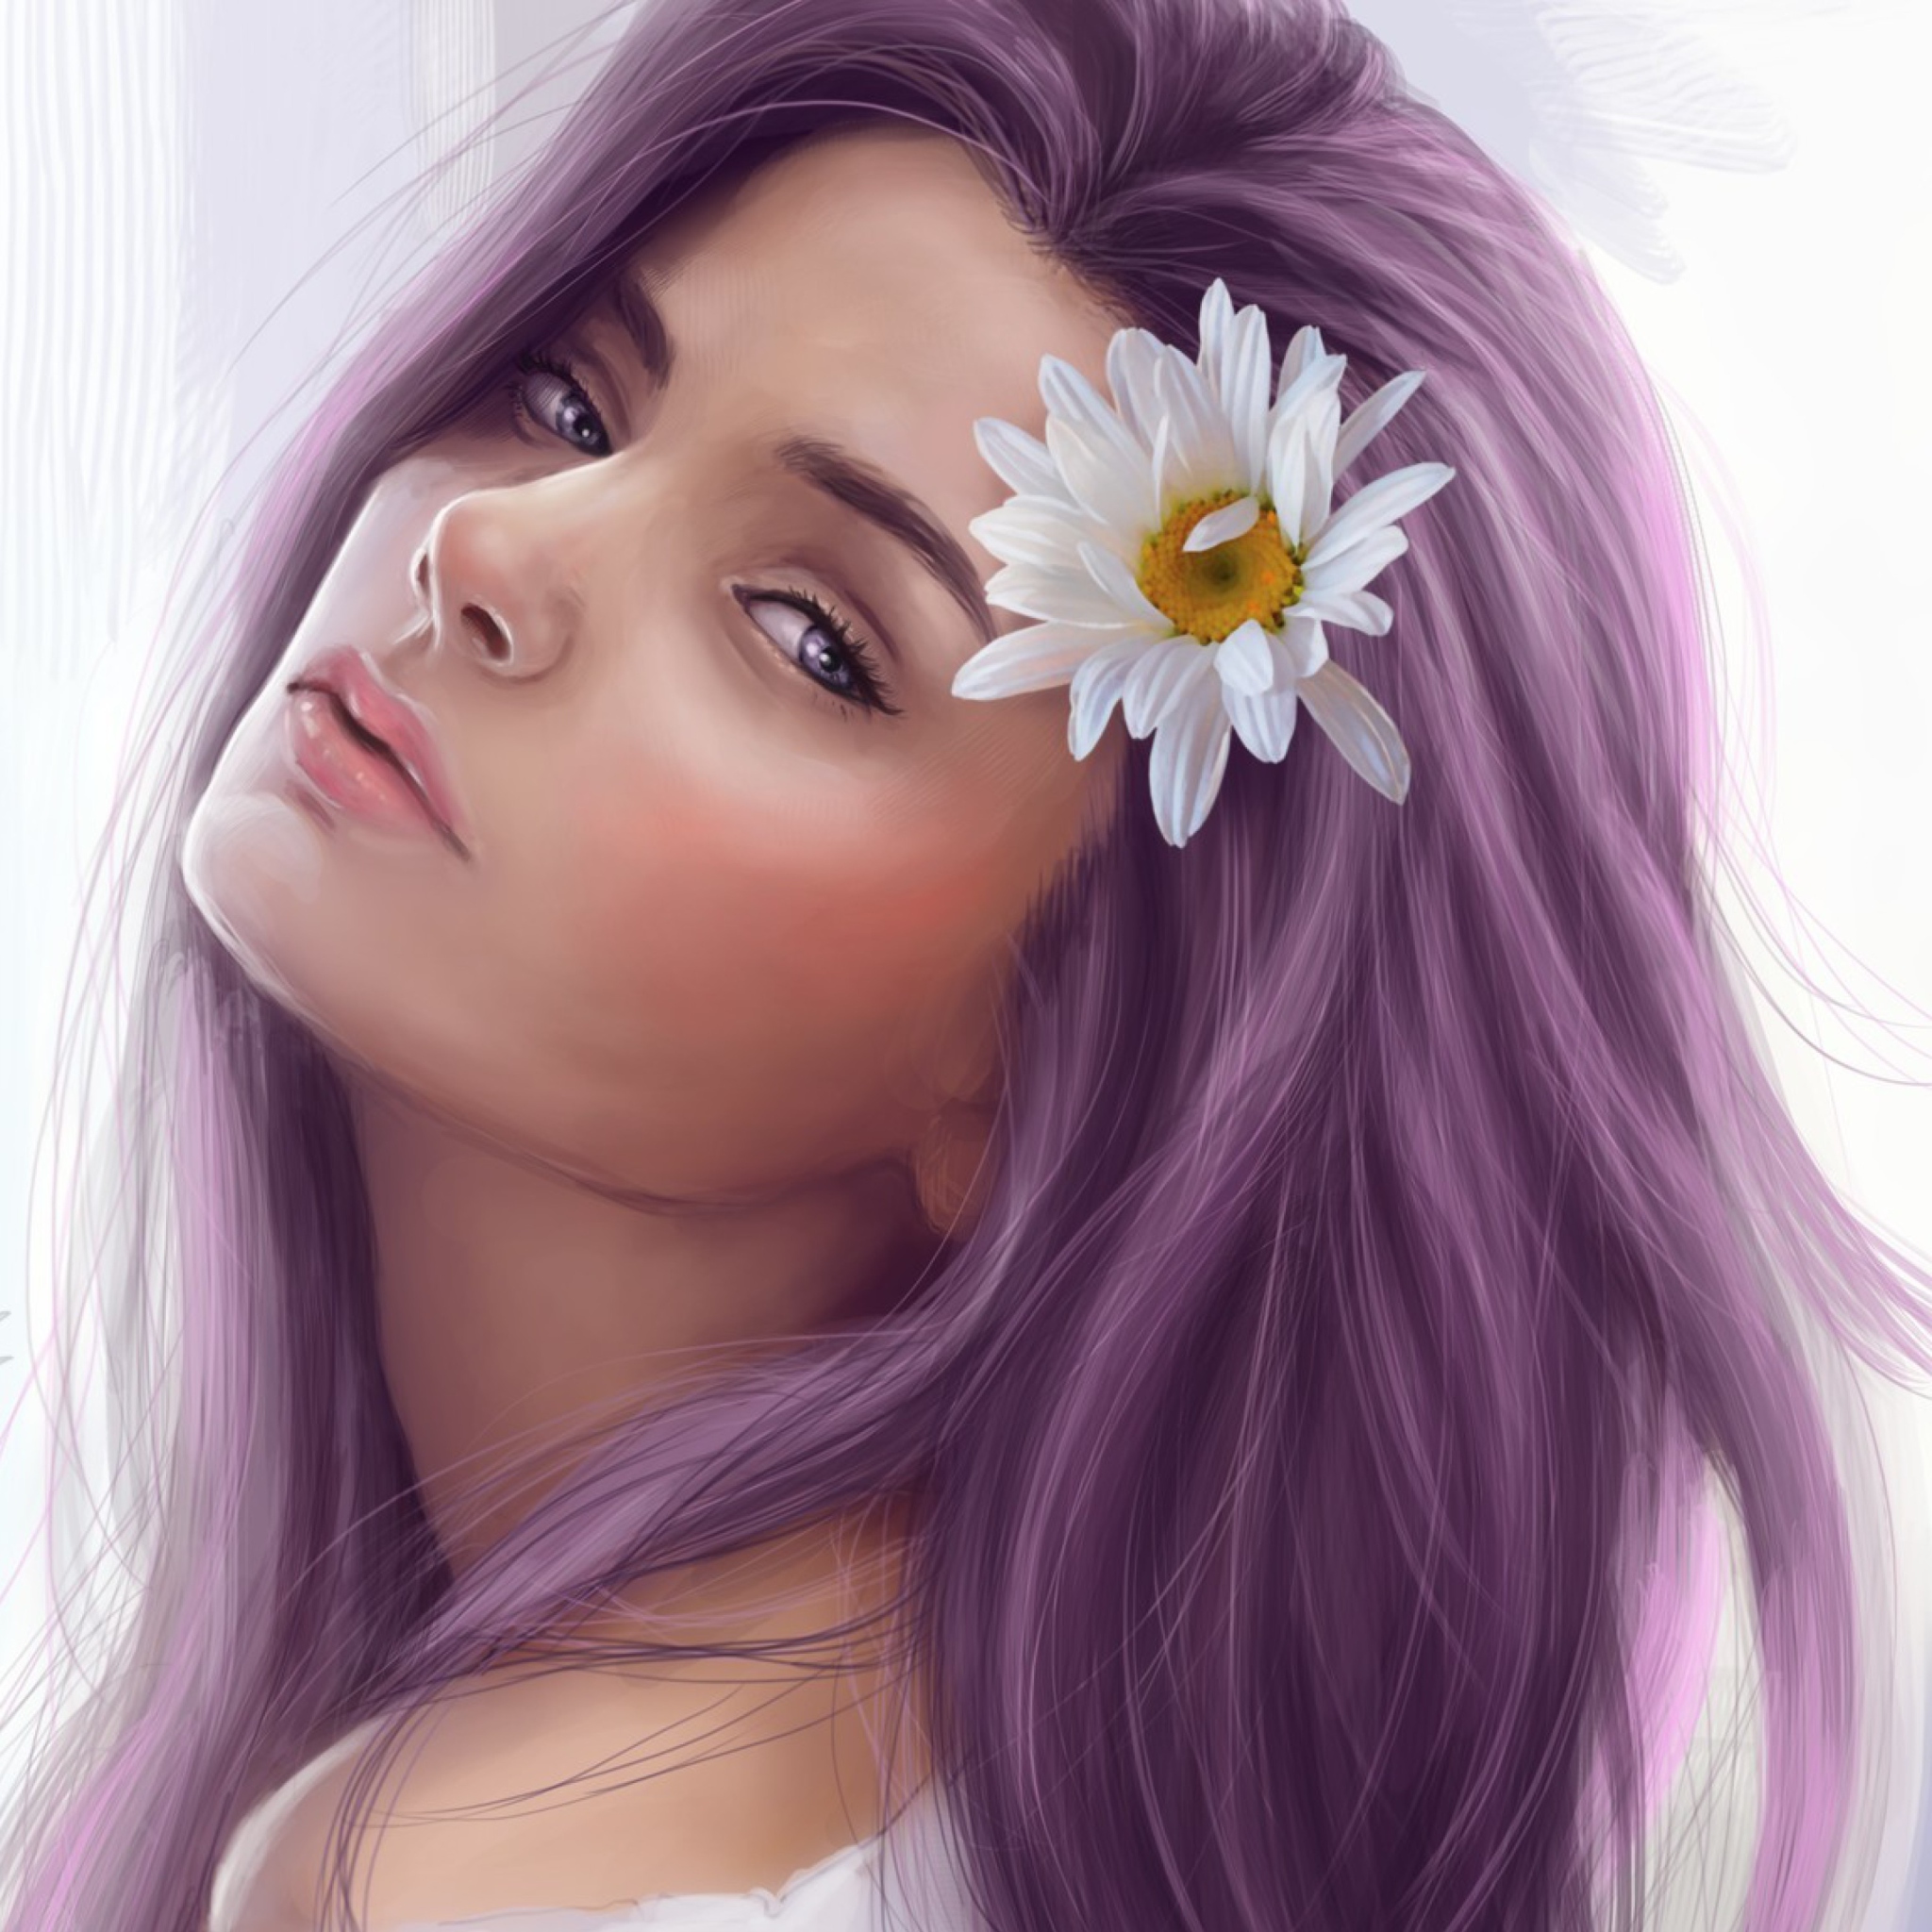 Das Girl With Purple Hair Painting Wallpaper 2048x2048